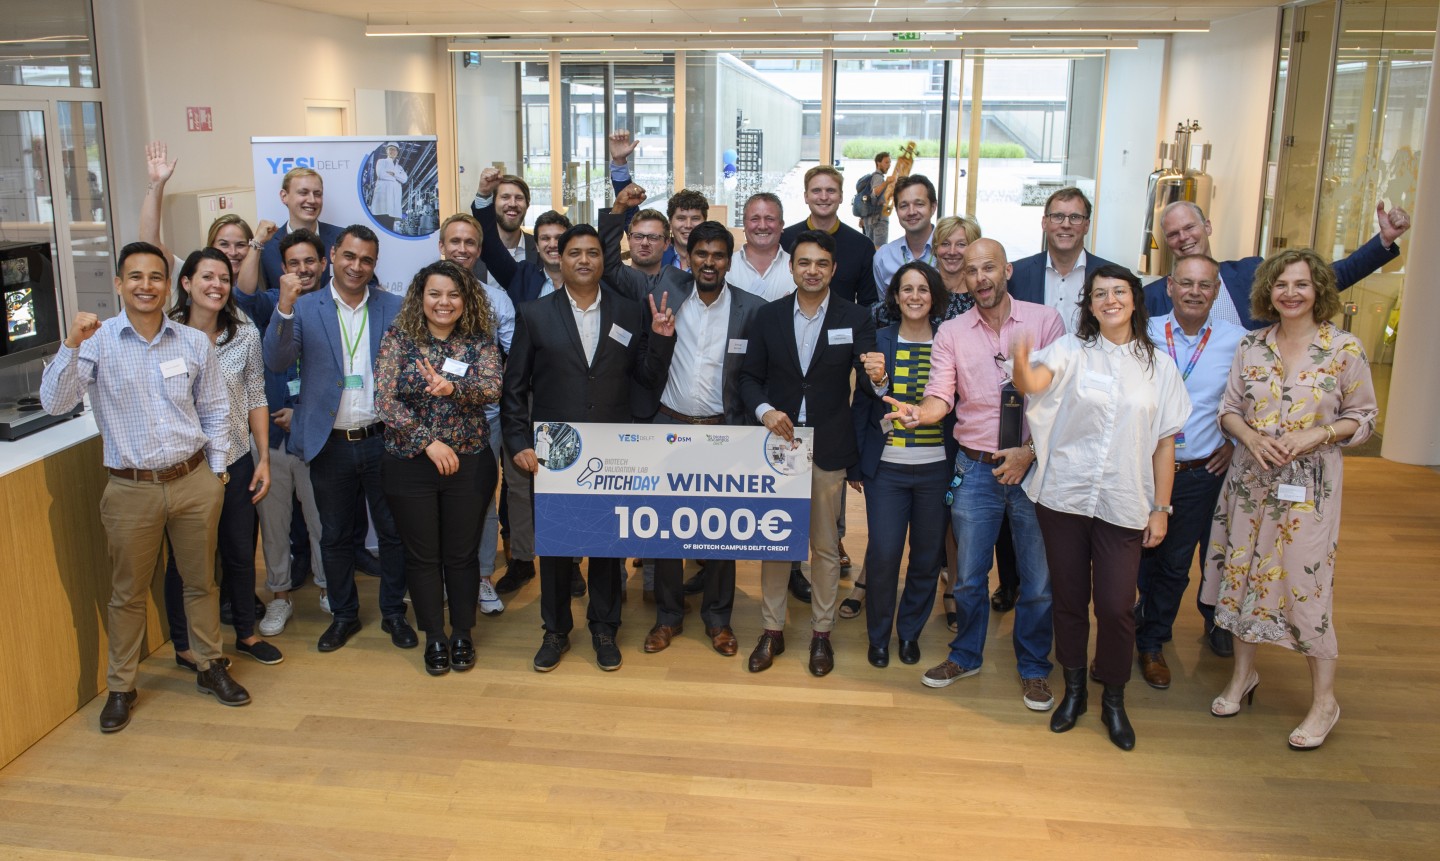 19th of July marked the end of a two-month training period for six promising biotech start-ups.